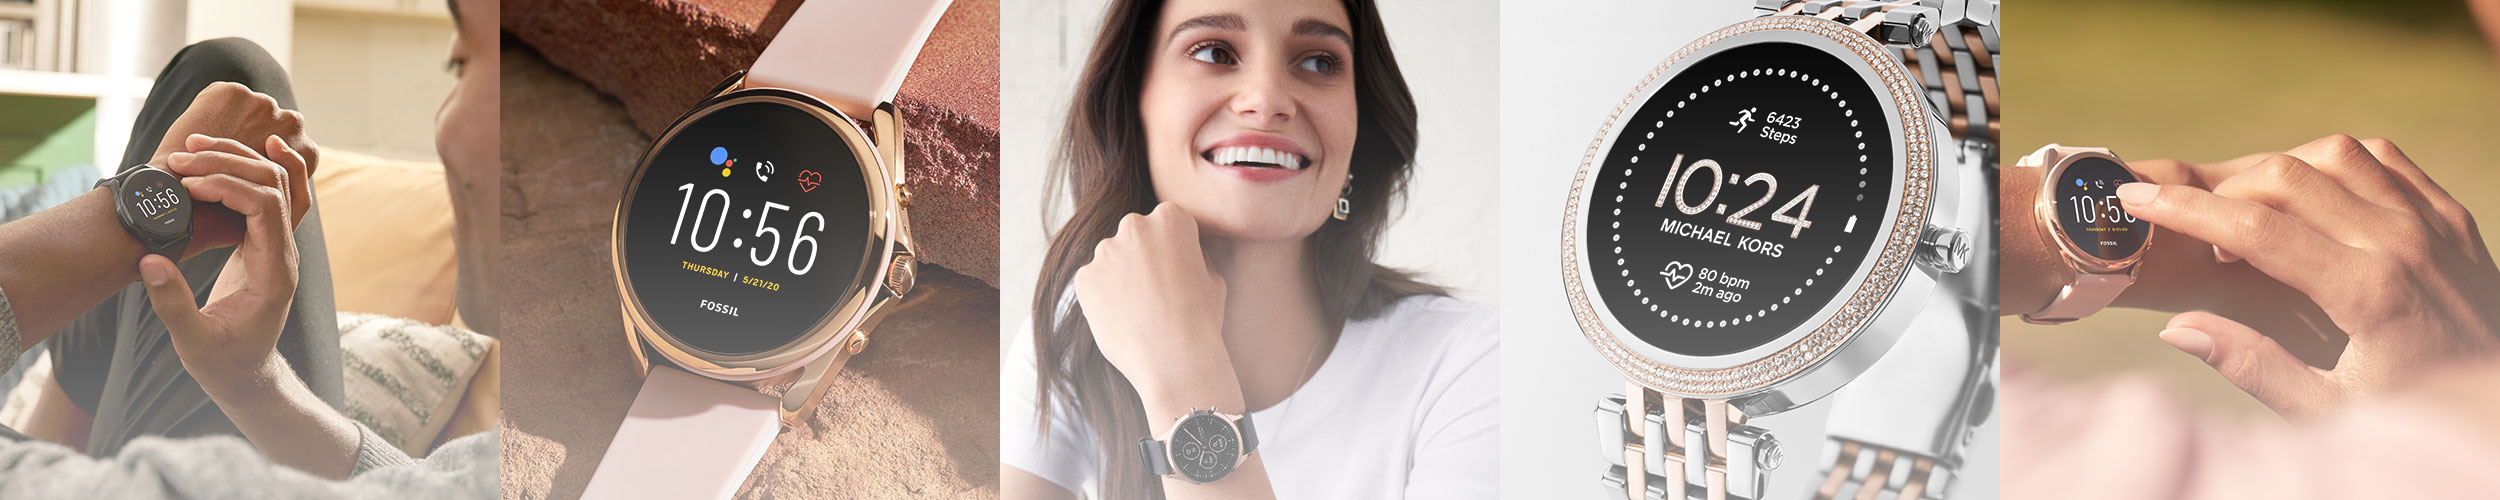 Fossil Launches LTE, Expands Gen 5E to Michael Kors and Hybrid HR to Skagen  | Fossil Group